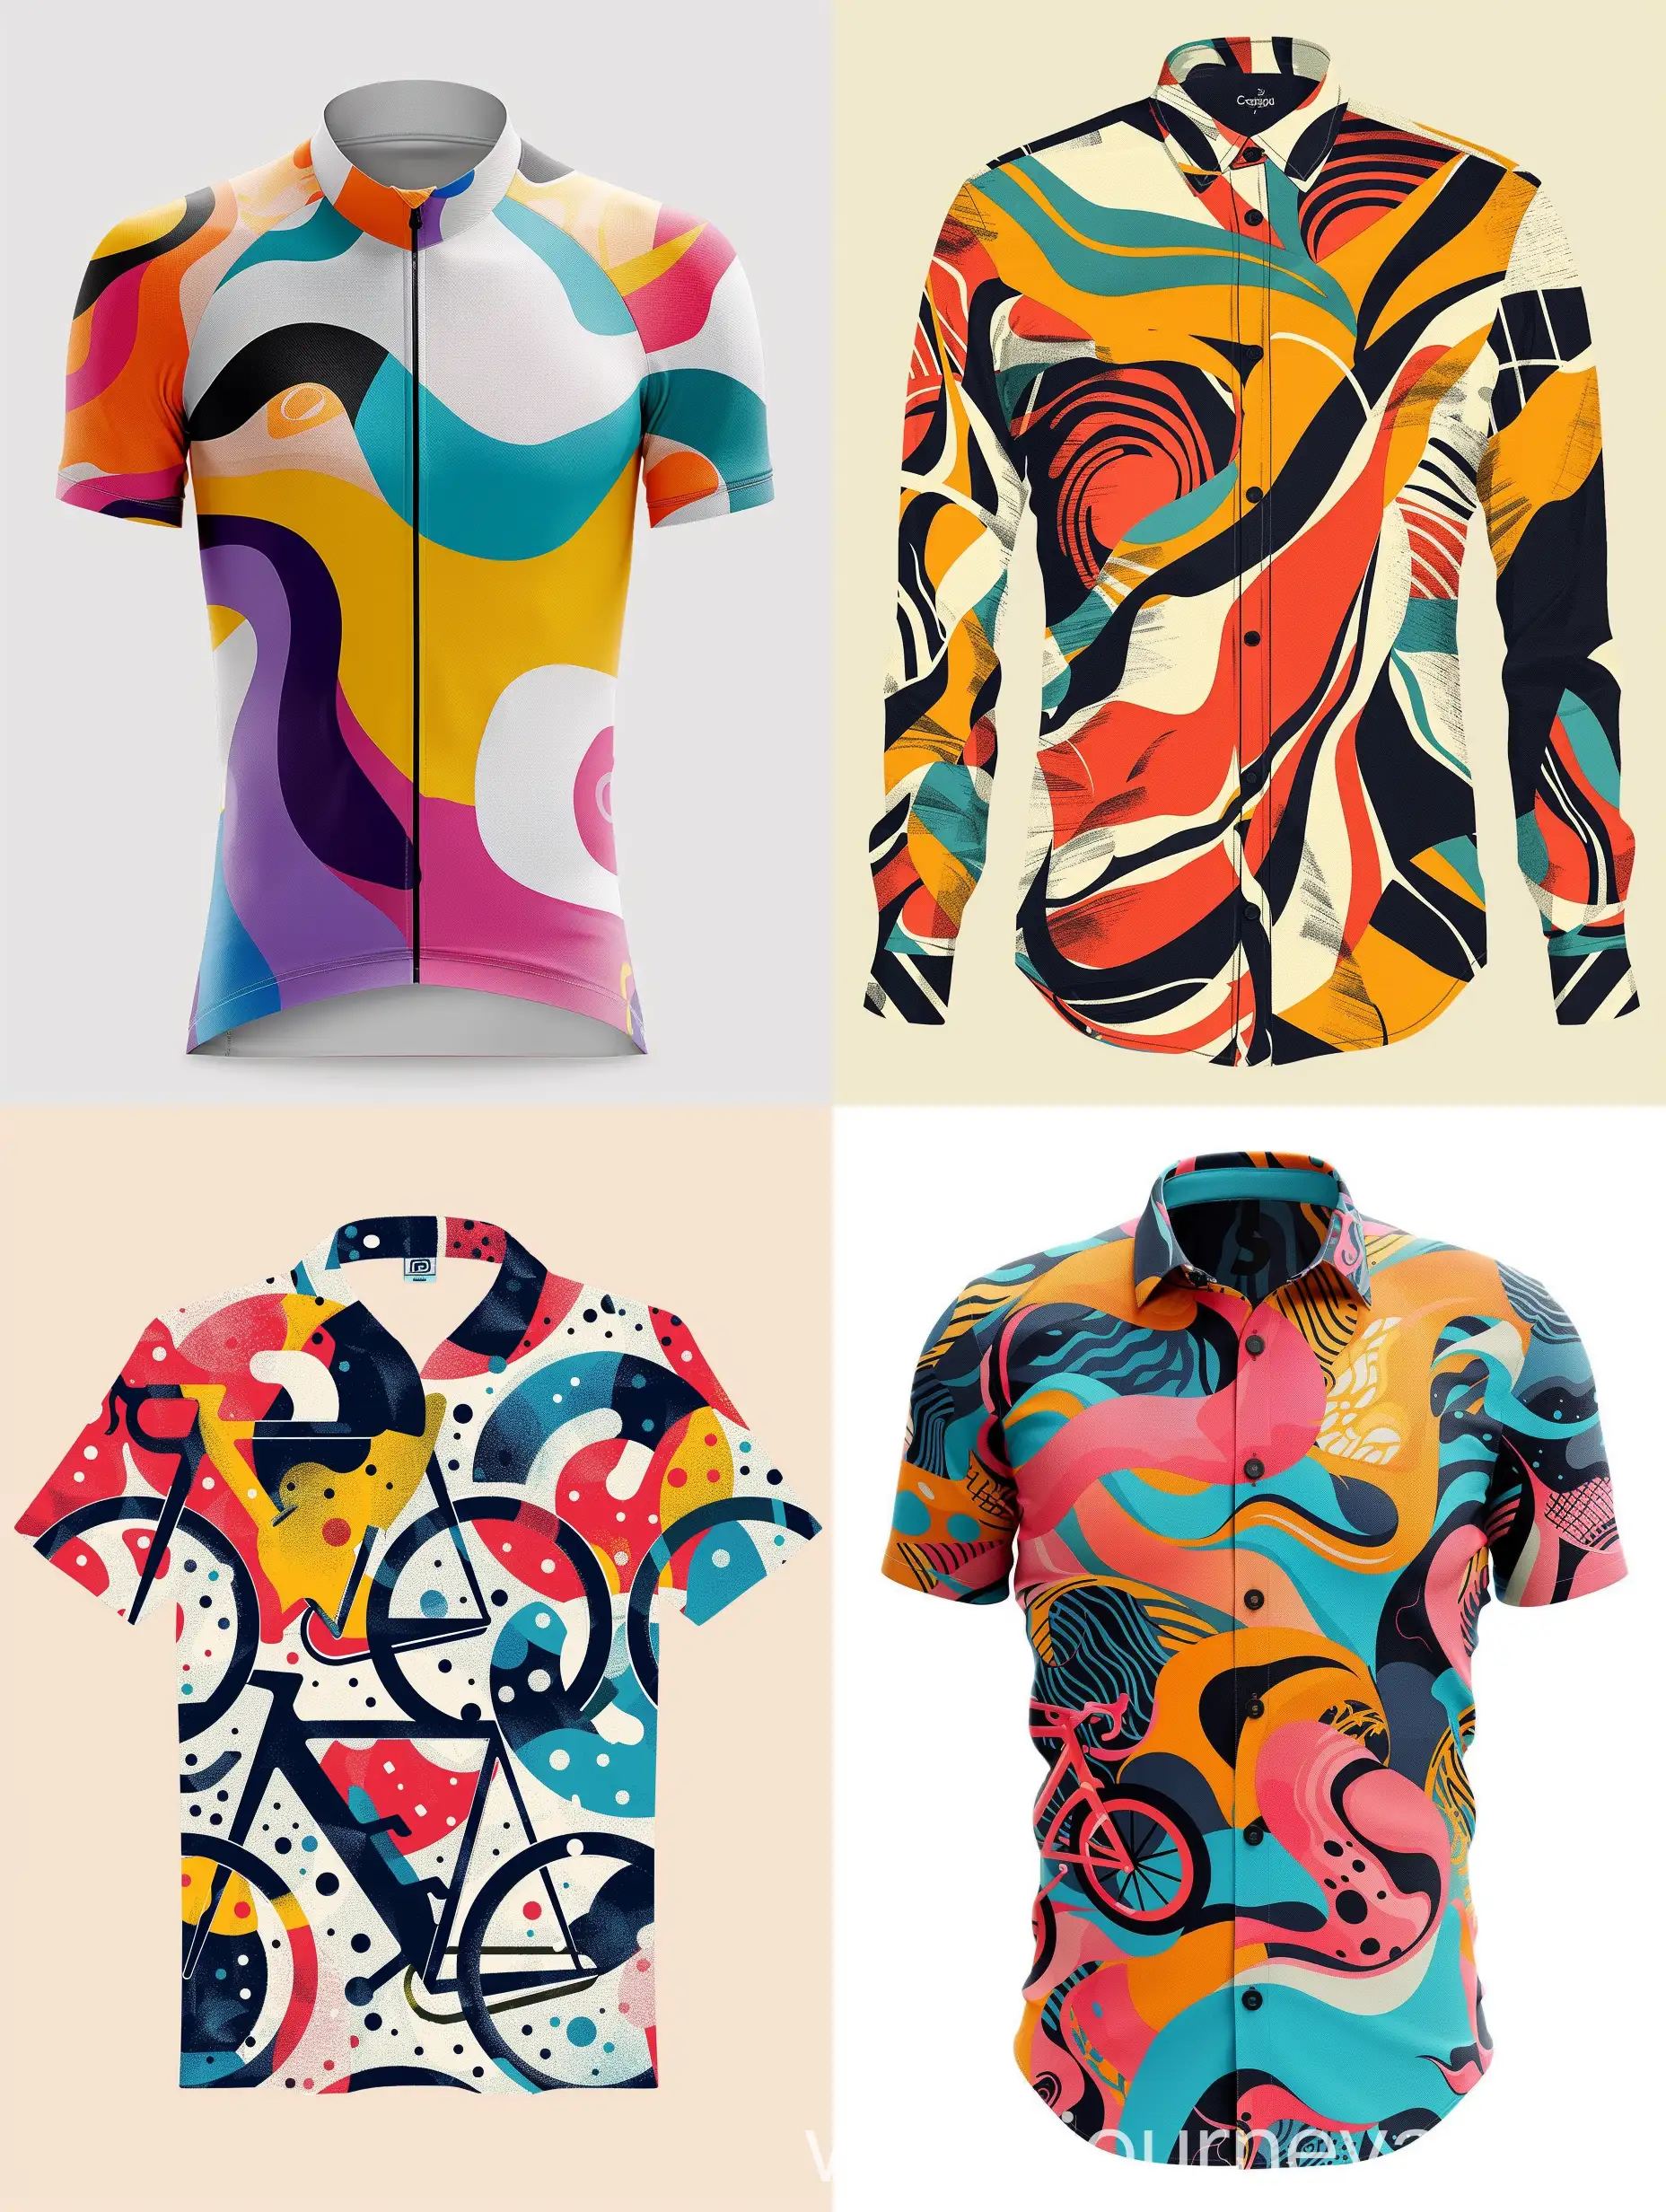 Colorful-Modern-Cycle-Shirt-Designs-with-Unique-Patterns